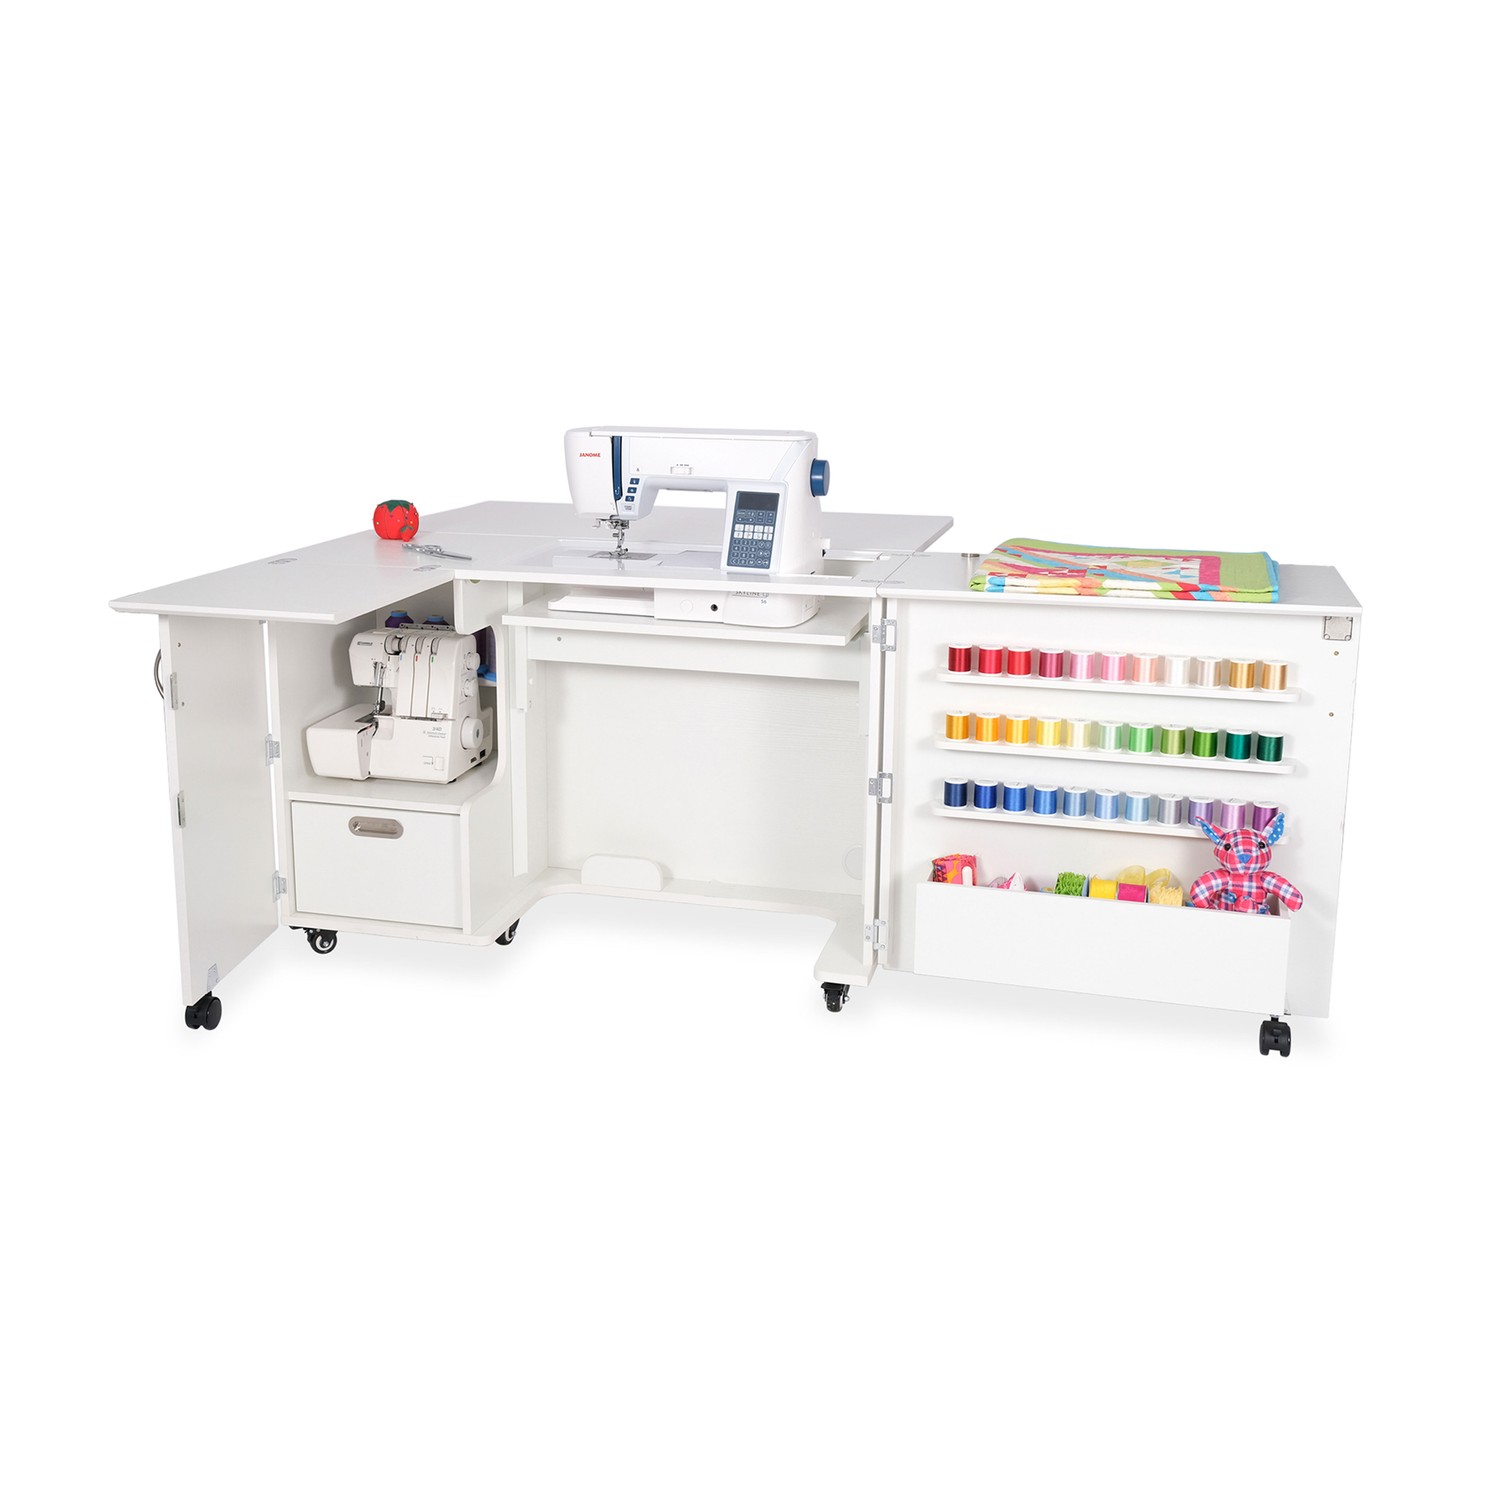 Wallaby Sewing Cabinet - Ash White | ConnectingThreads.com